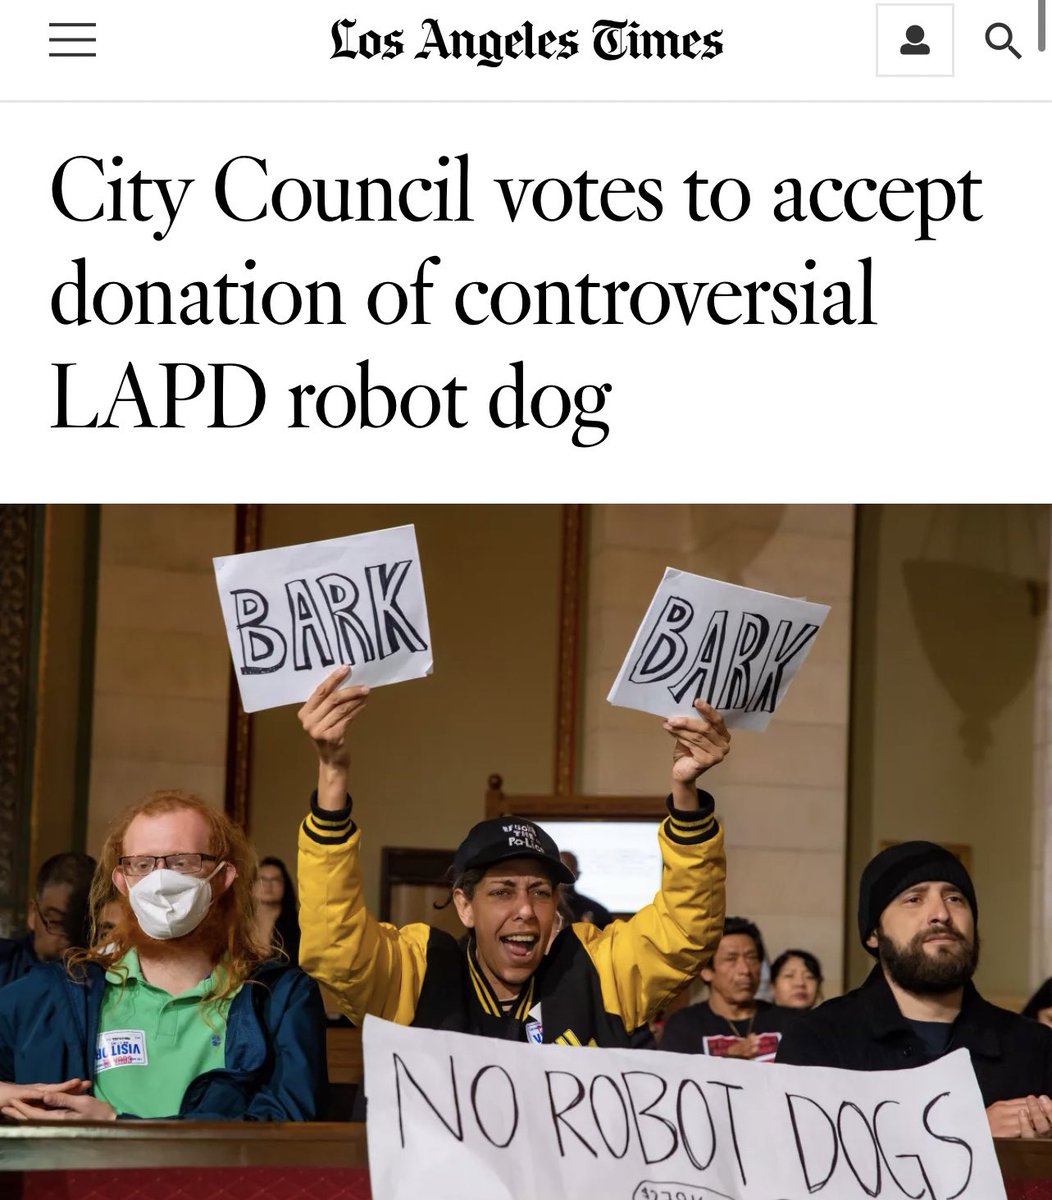 Amid massive public outcry about surveillance and safety, the Los Angeles City Council voted Tuesday to accept the donation of a $280,000 robot dog for LAPD.